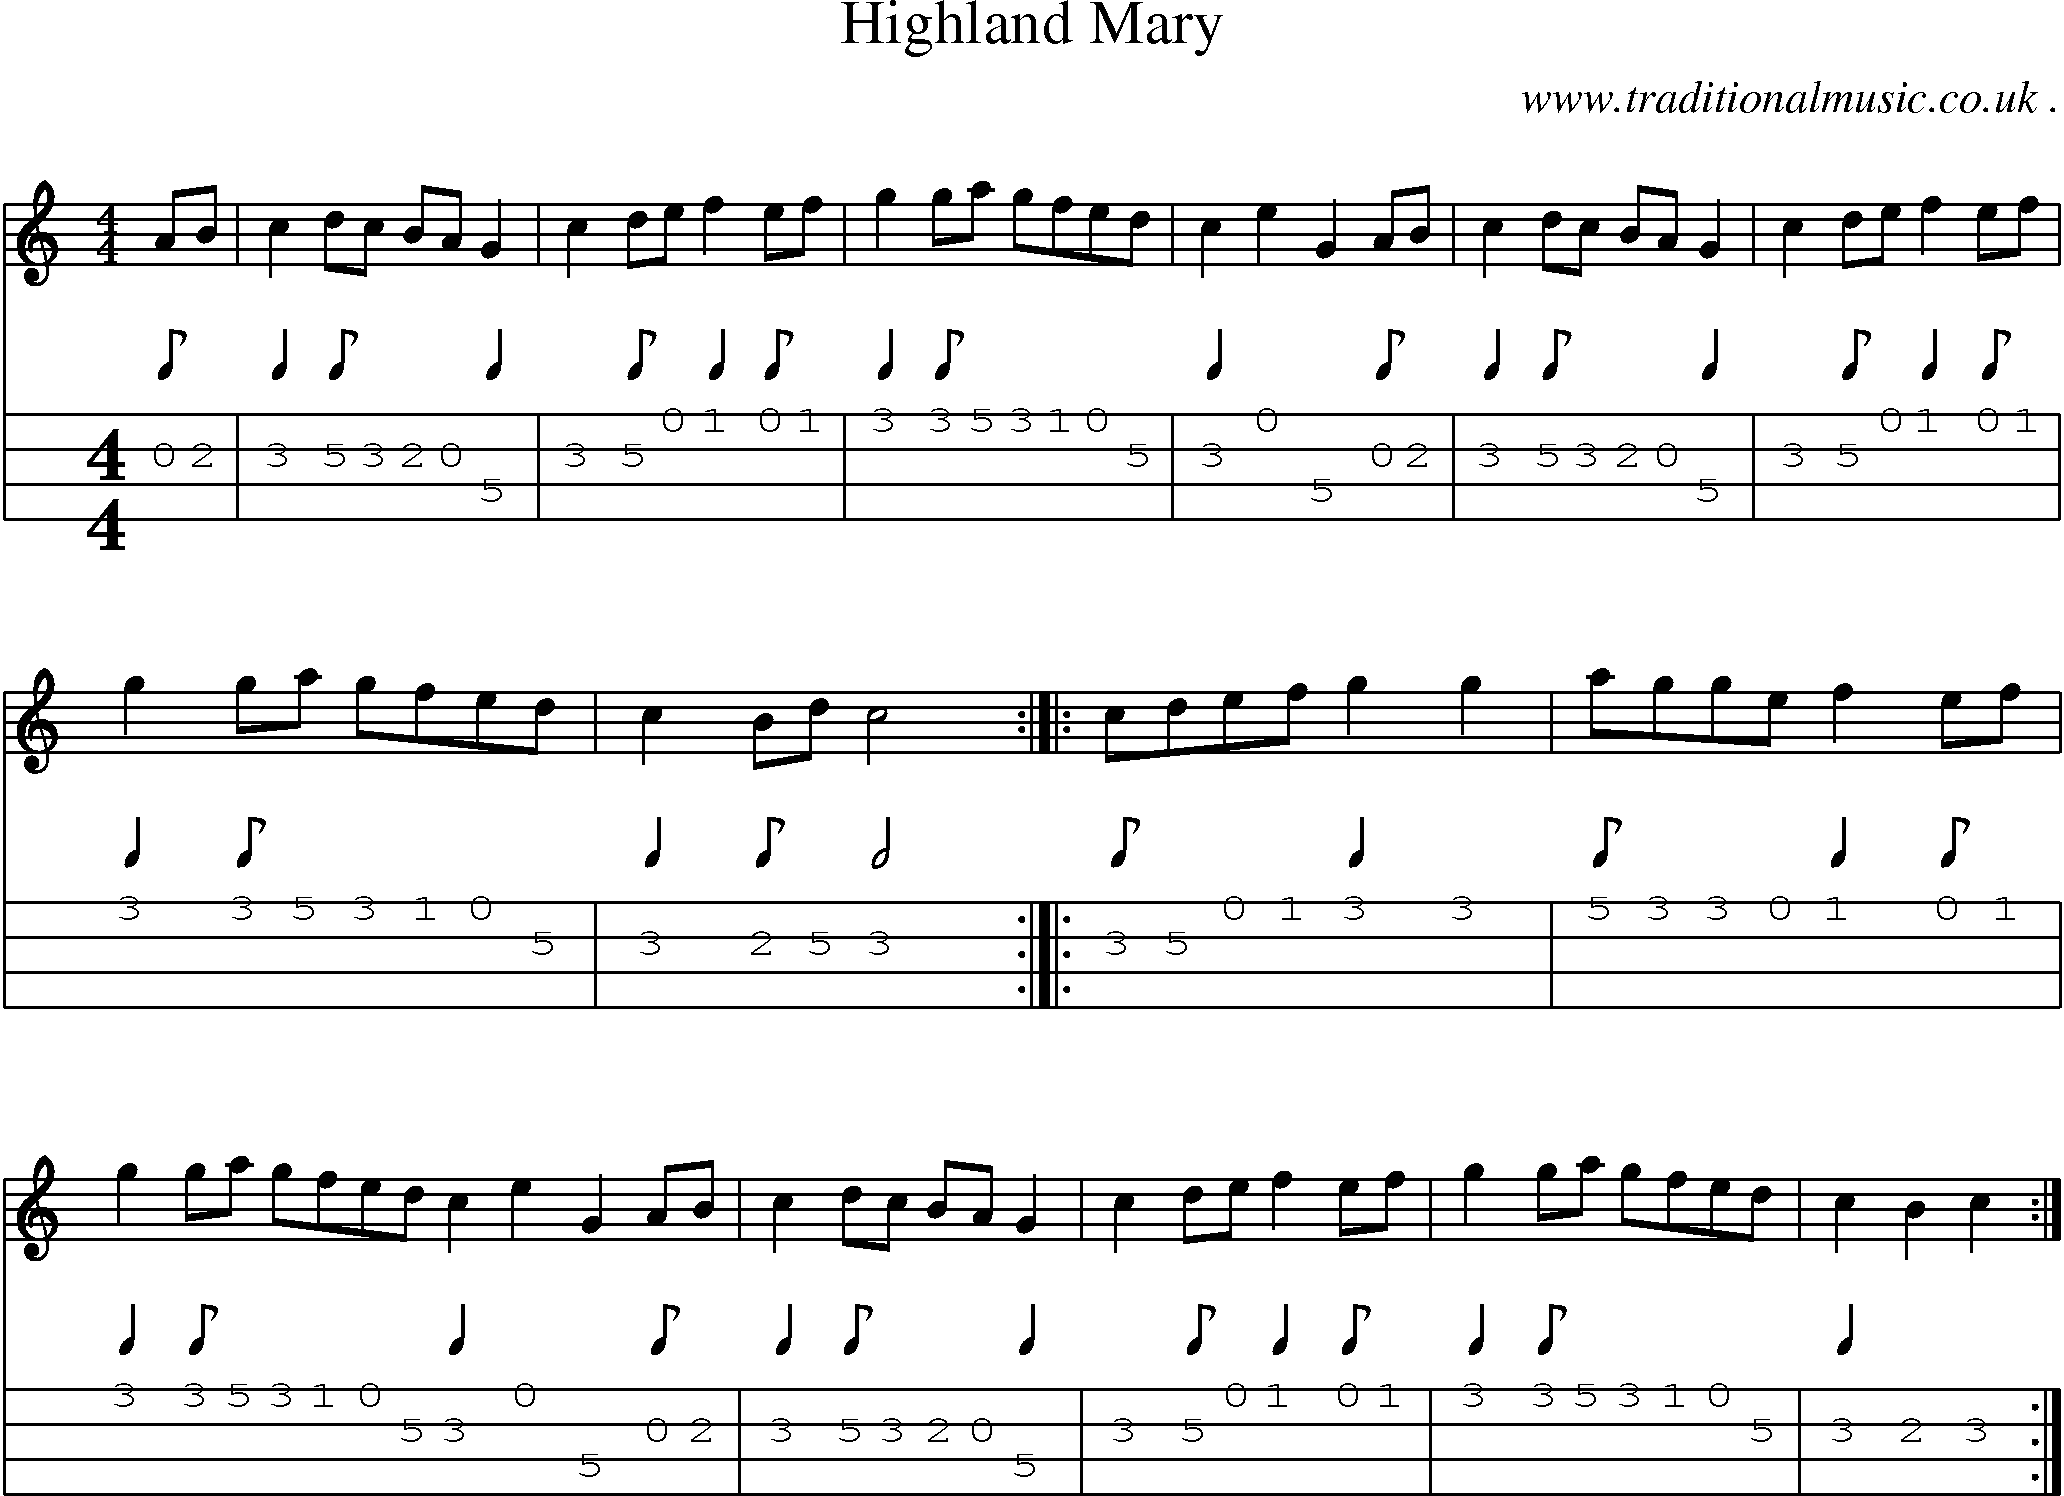 Sheet-music  score, Chords and Mandolin Tabs for Highland Mary